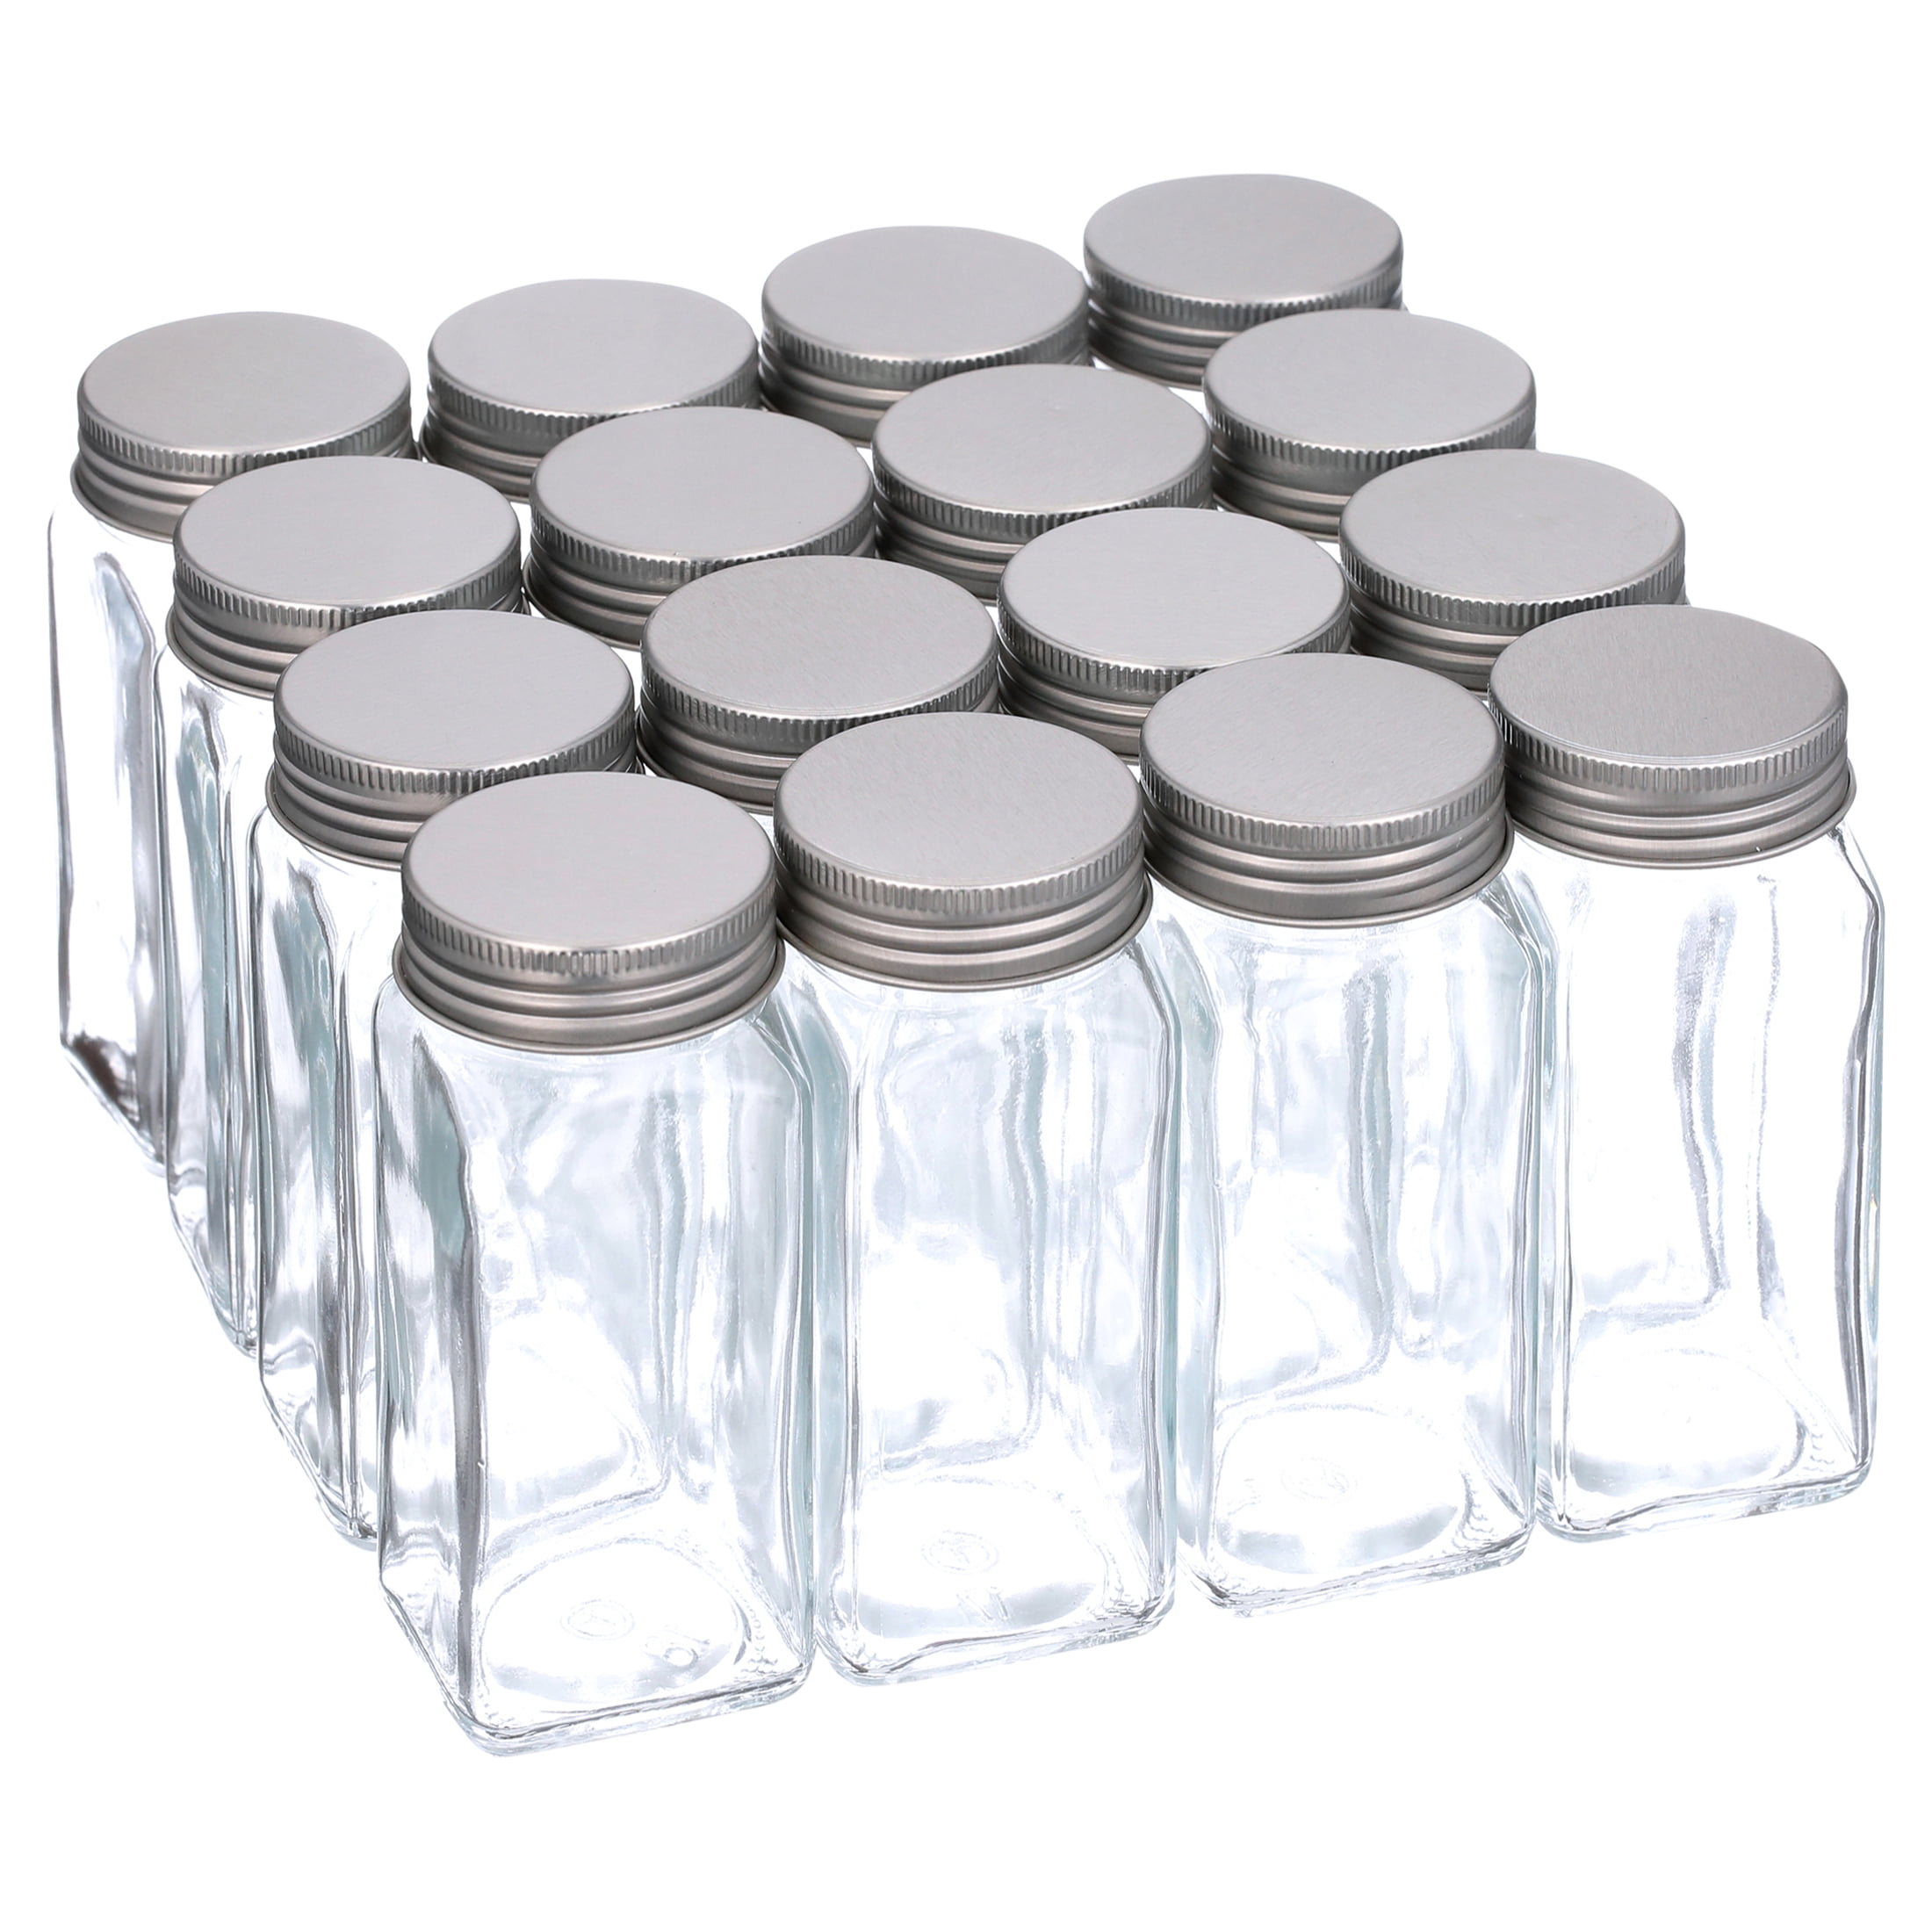 16 Pack 4 oz Glass Spice & Salts Jars Bottles, Clear Square Glass Seasoning Jars with Aluminum Silver Metal Caps and Pour/Sift Shaker LID. 1 Pen,40